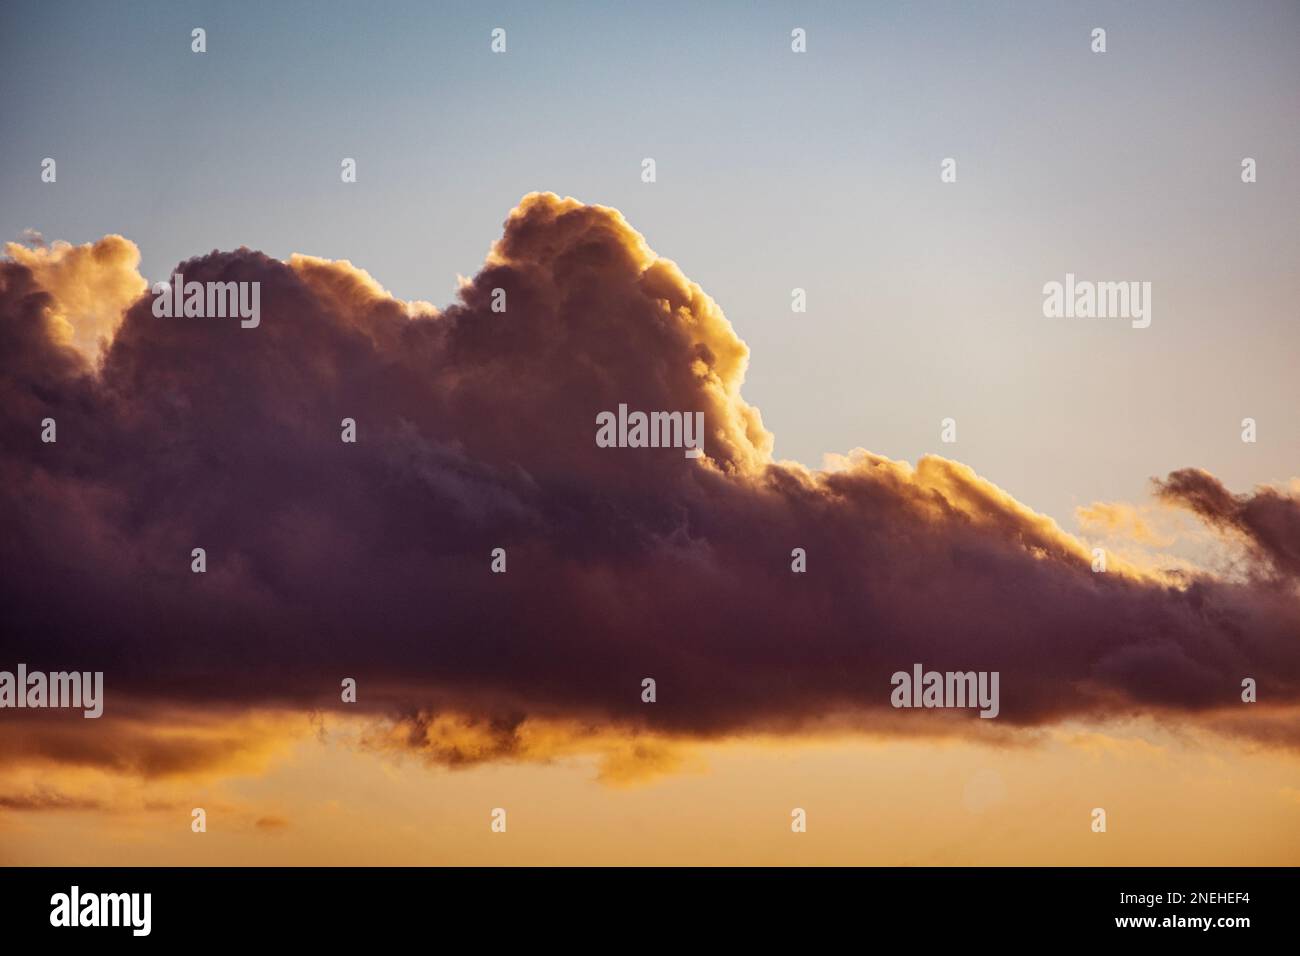 Looking up at a cloud with rim lighting on an early morning sunrise Stock Photo